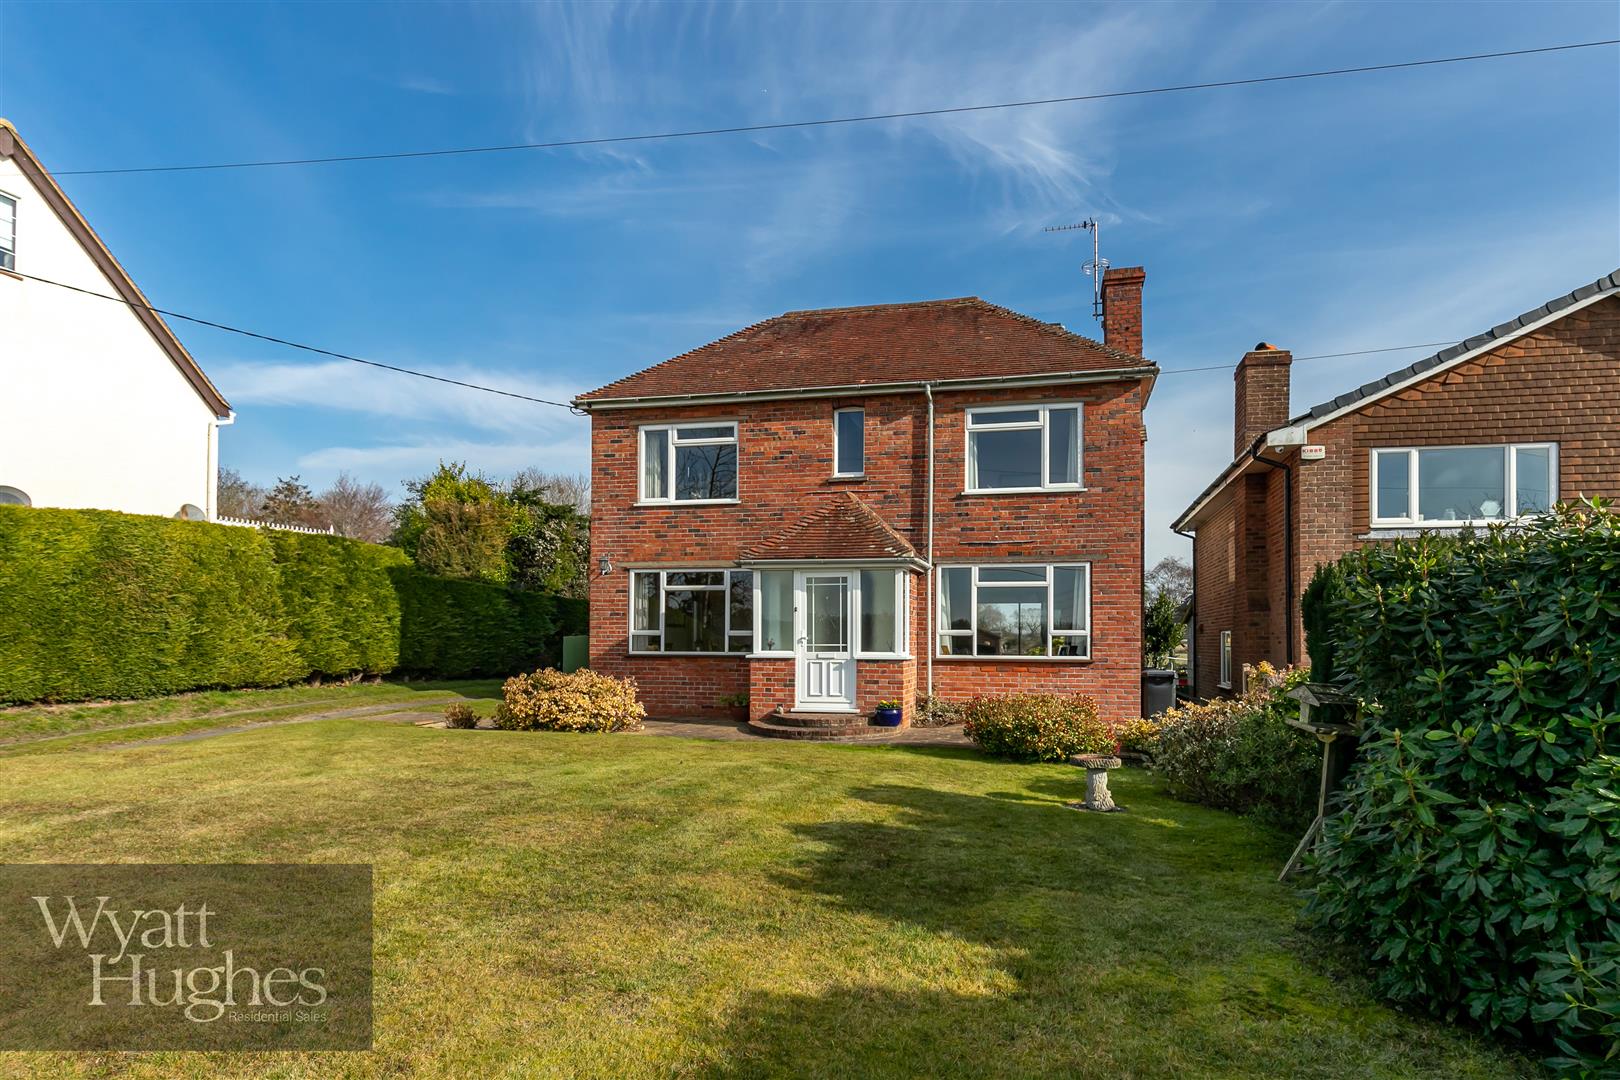 4 bed detached house for sale in Bexhill Road, Ninfield, Battle  - Property Image 2